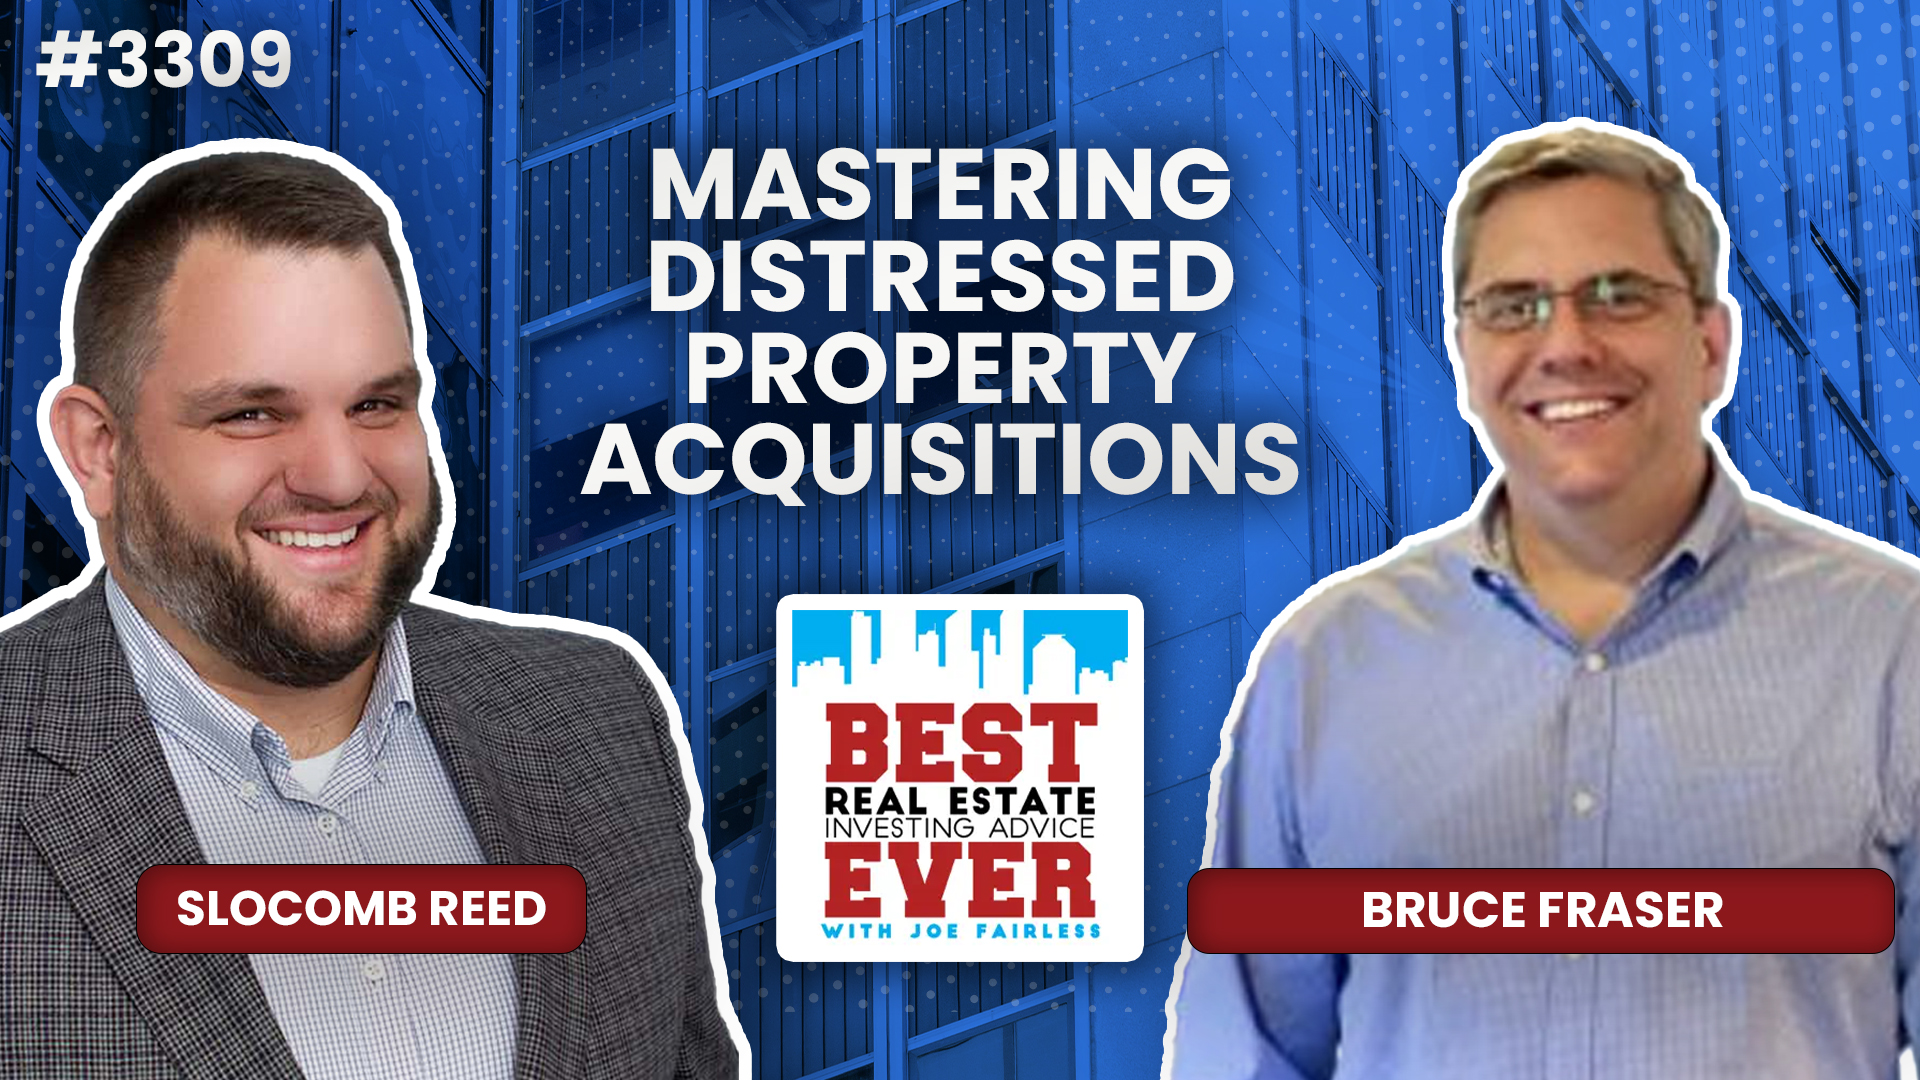 JF3309: Bruce Fraser - Mastering Distressed Property Acquisitions